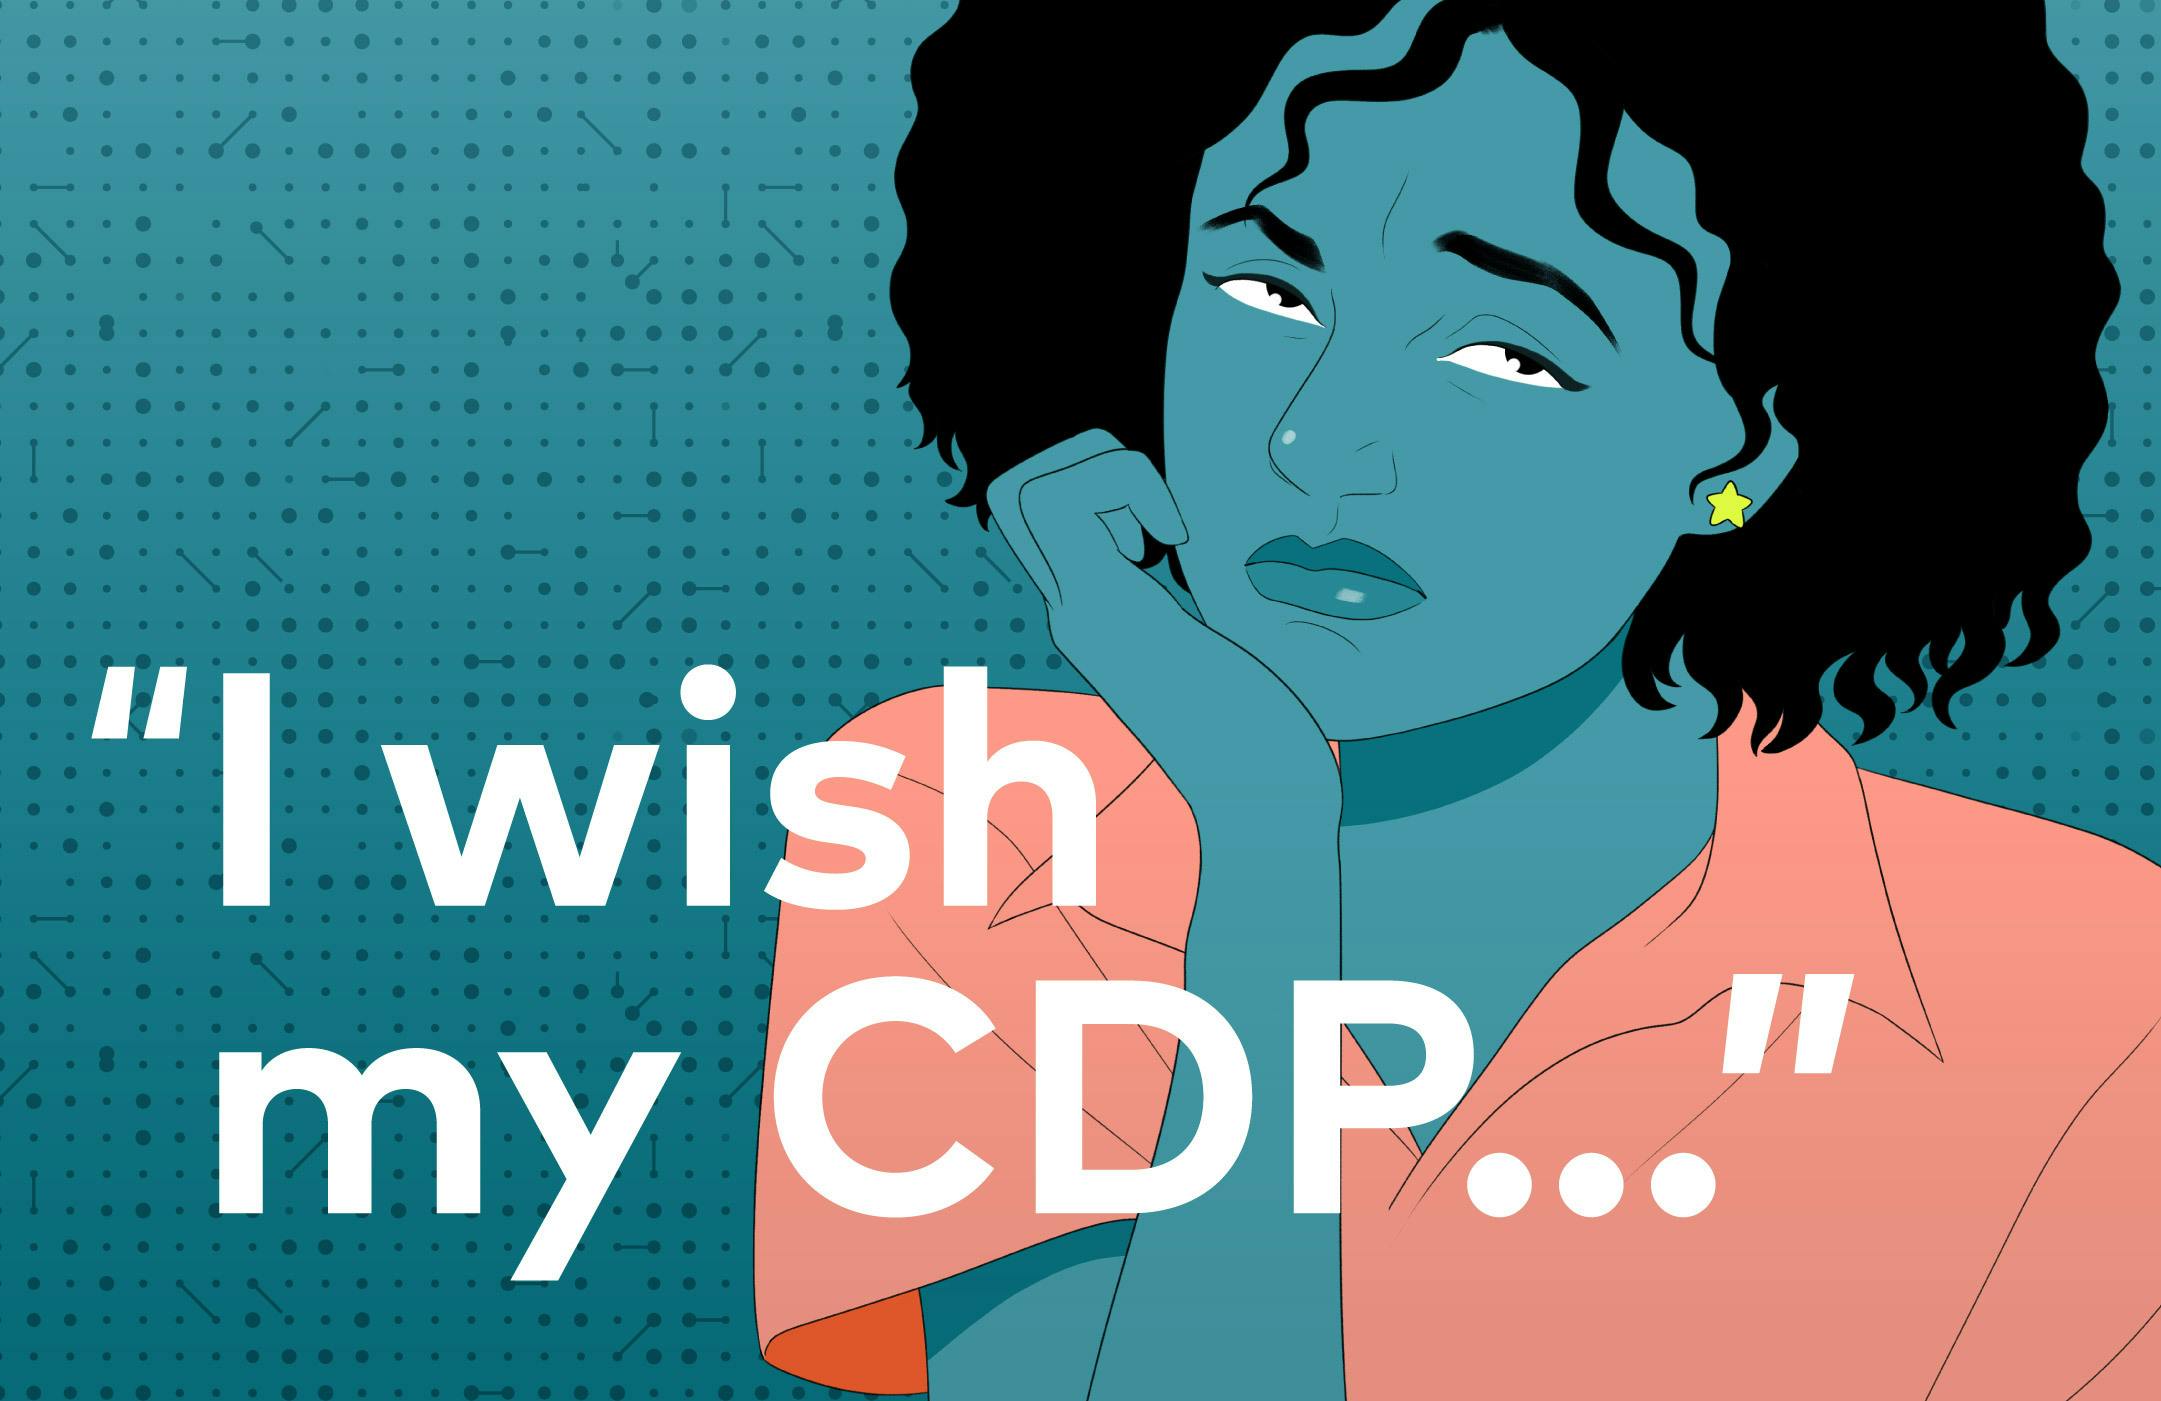 Illustration of woman looking disappointed along with text "I wish my CDP..."